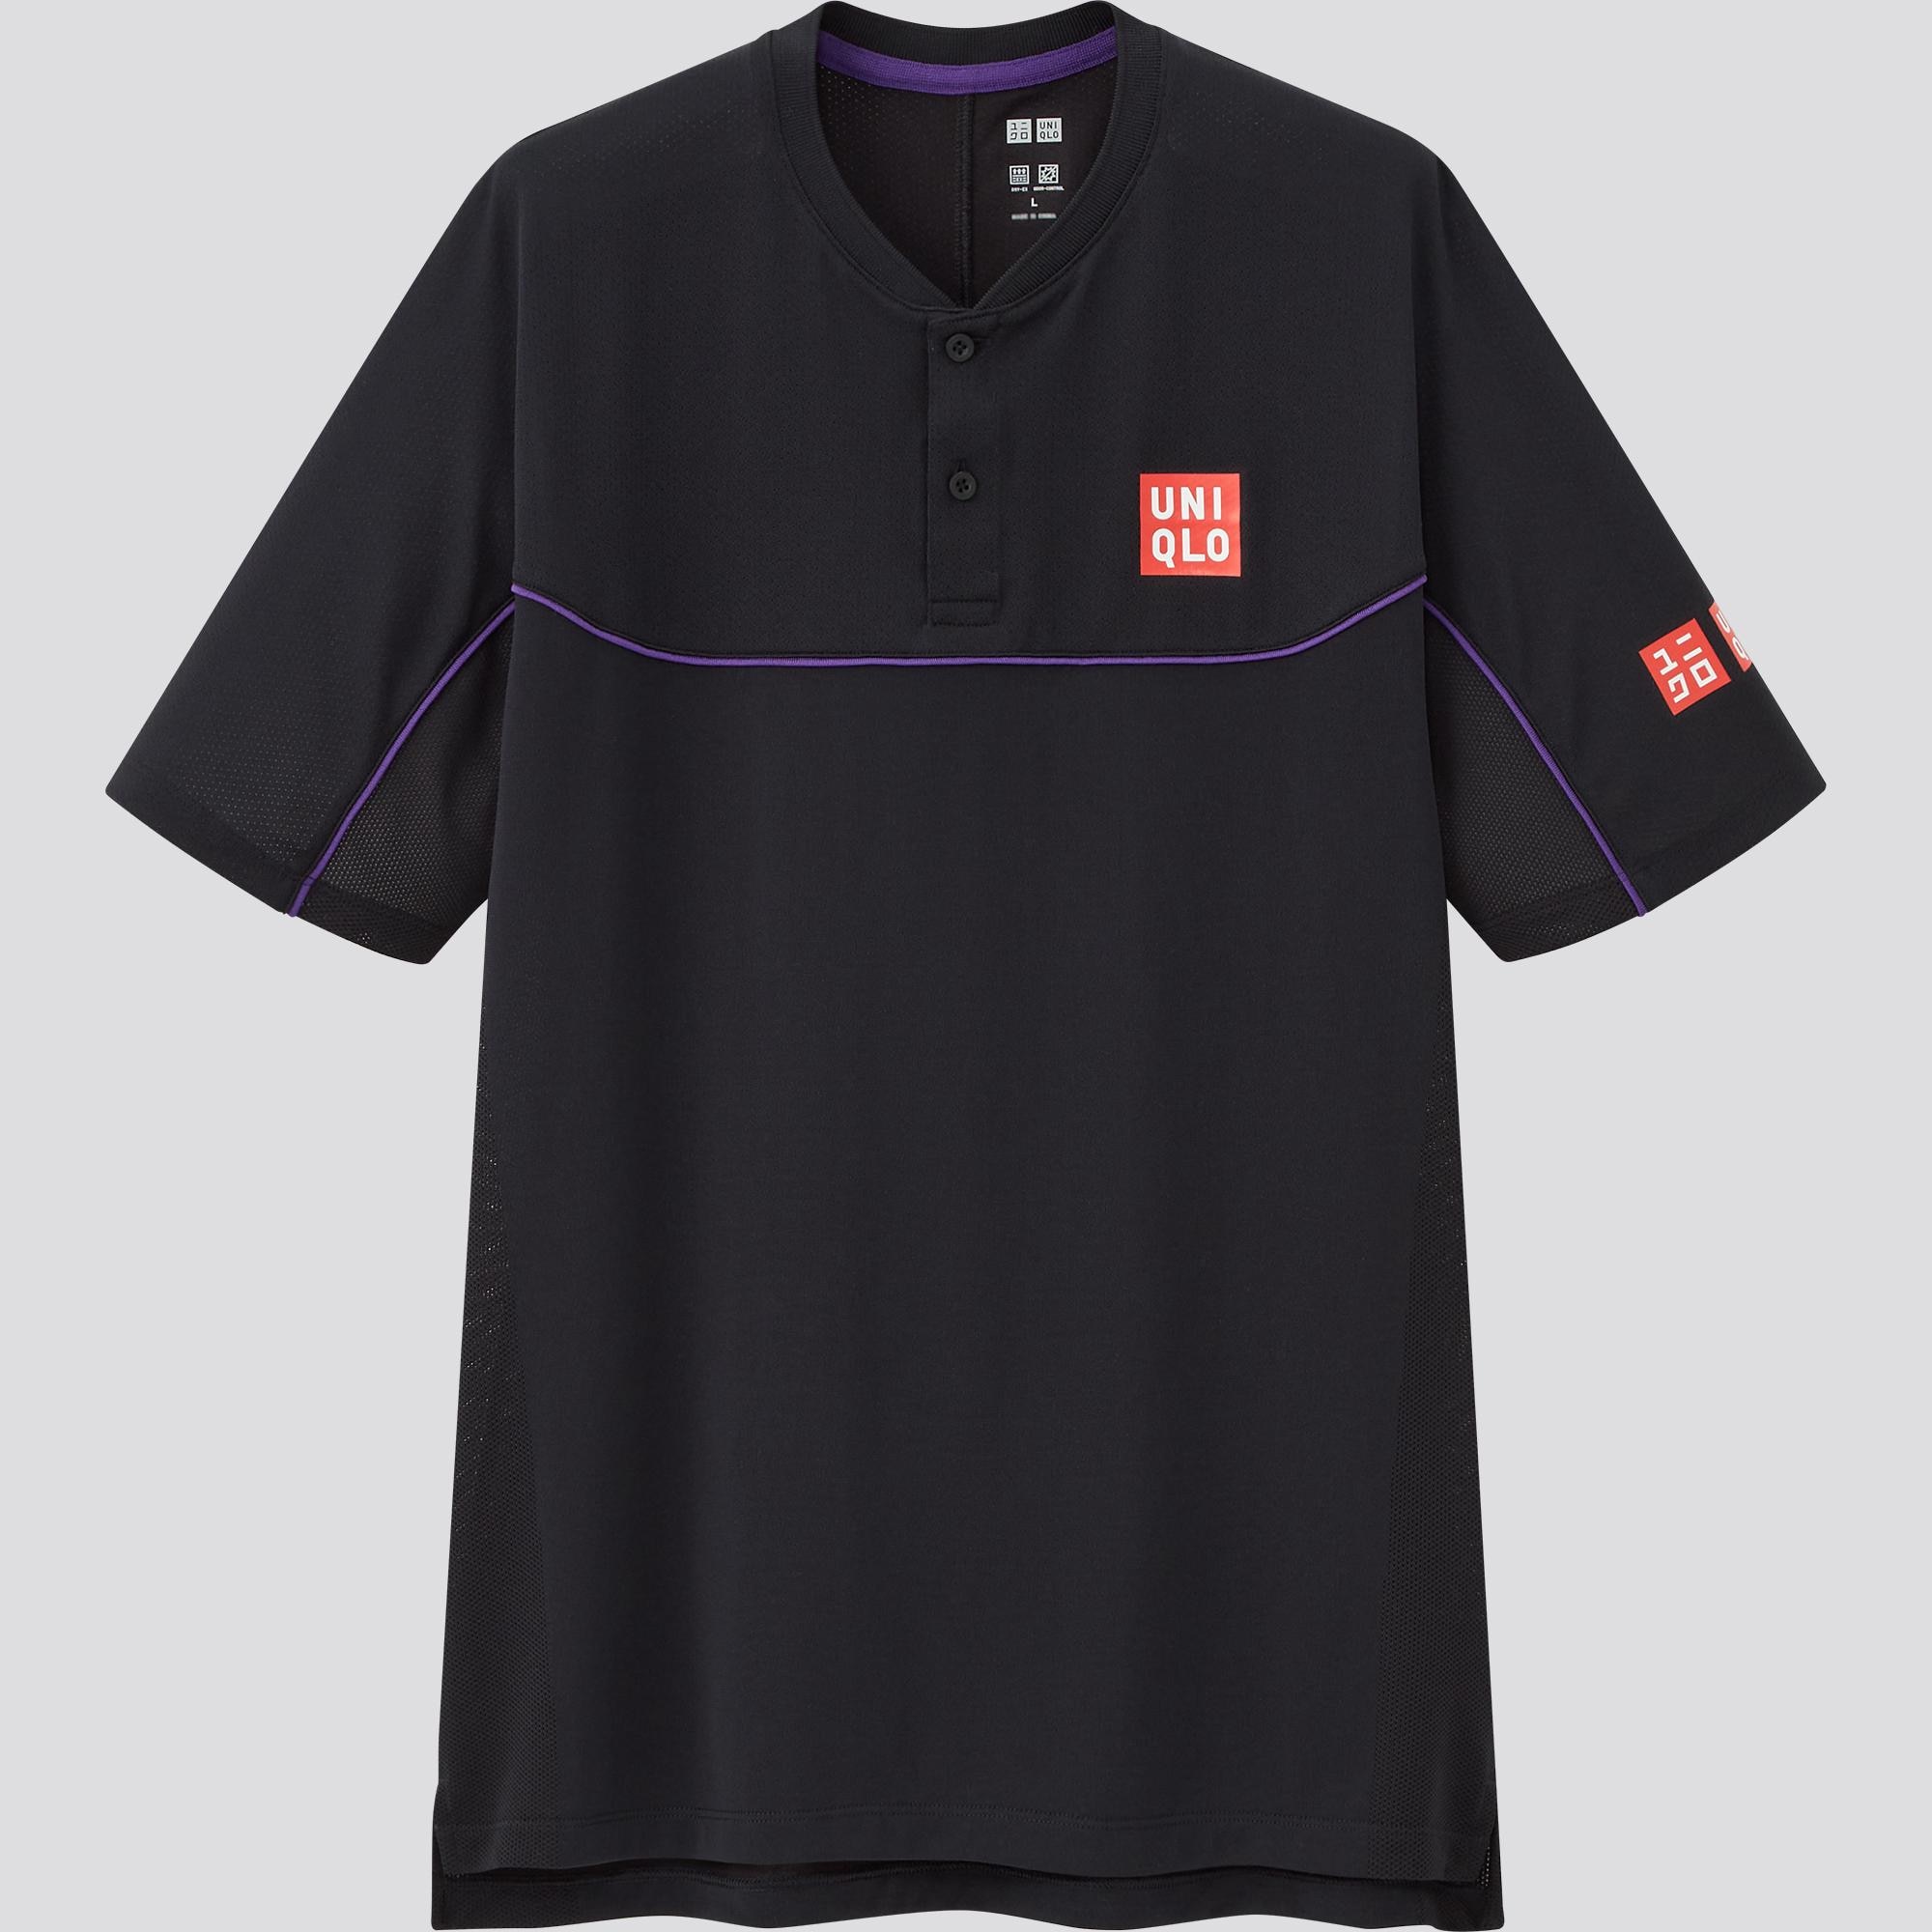 WOMENS MENS AND KIDS CLOTHING  ACCESSORIES  UNIQLO PH